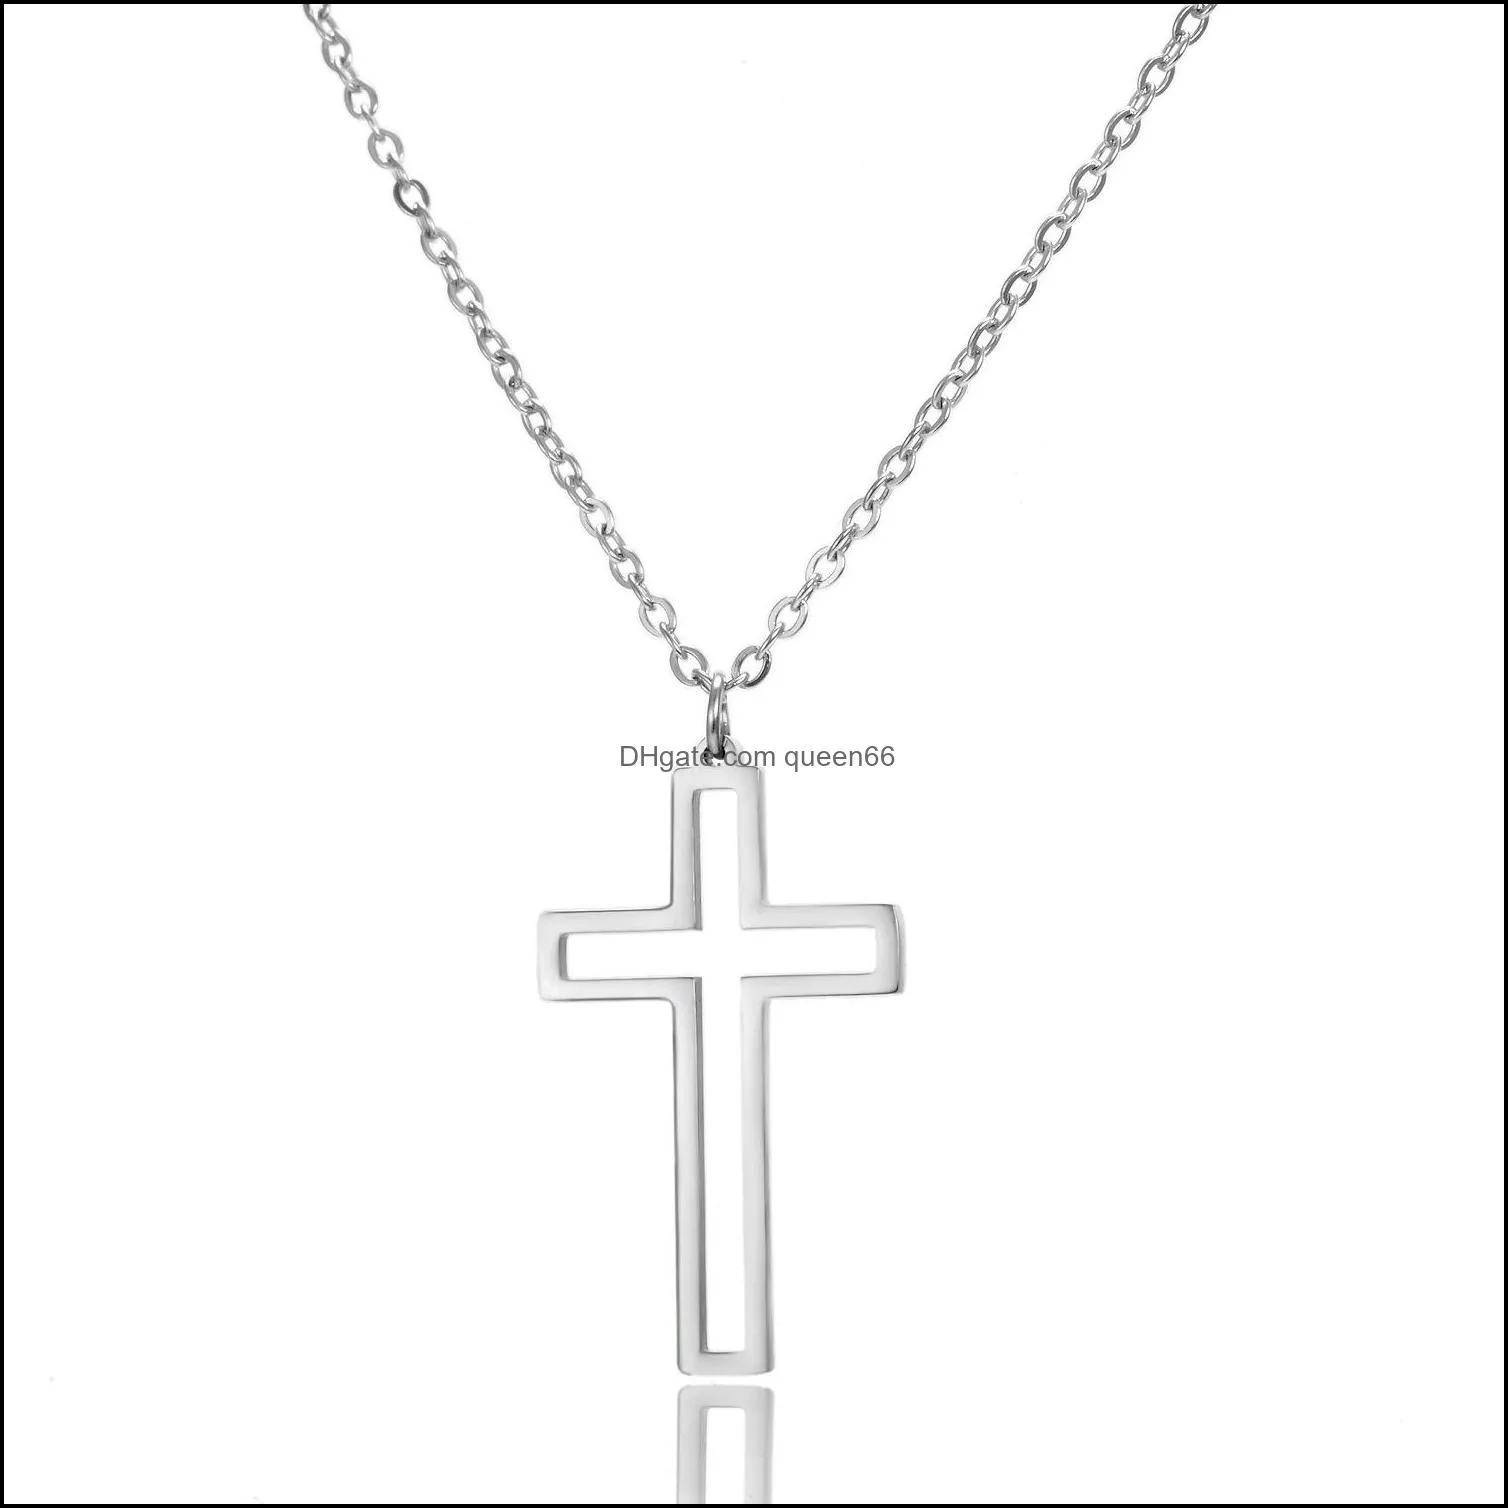 hollow stainless steel necklaces for women men long chain cross pendant religious christian ornament jewelry